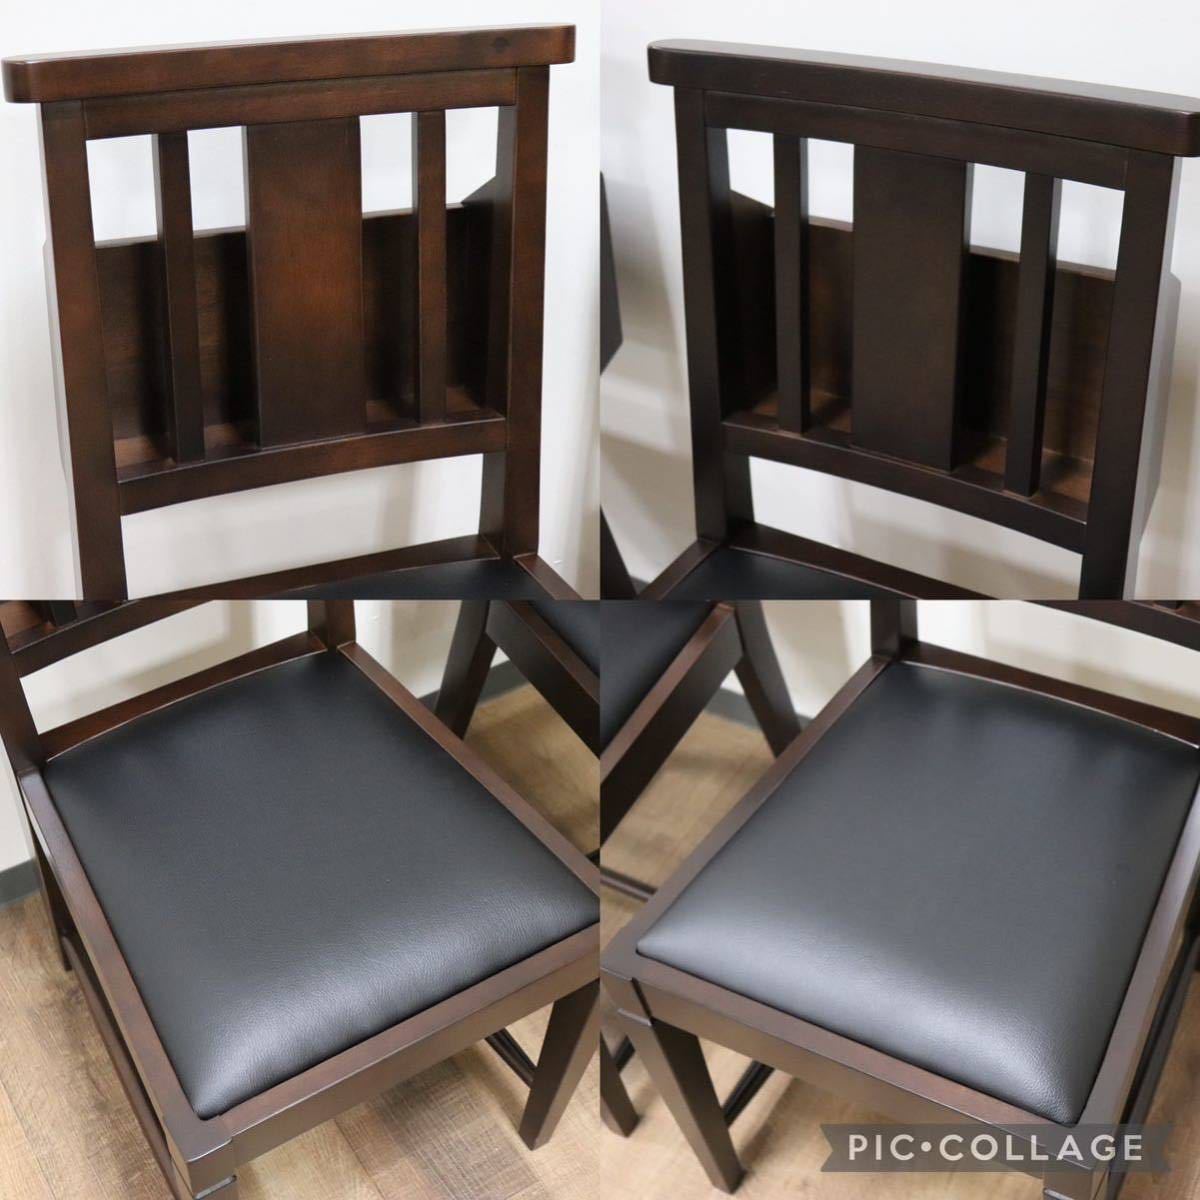 GMGN342A○CHERRY FURNITURE / 桜屋工業 ダイニングチェア アームレスチェア マガジンラック 合皮 ダークブラウン 2脚セット 展示未使用品